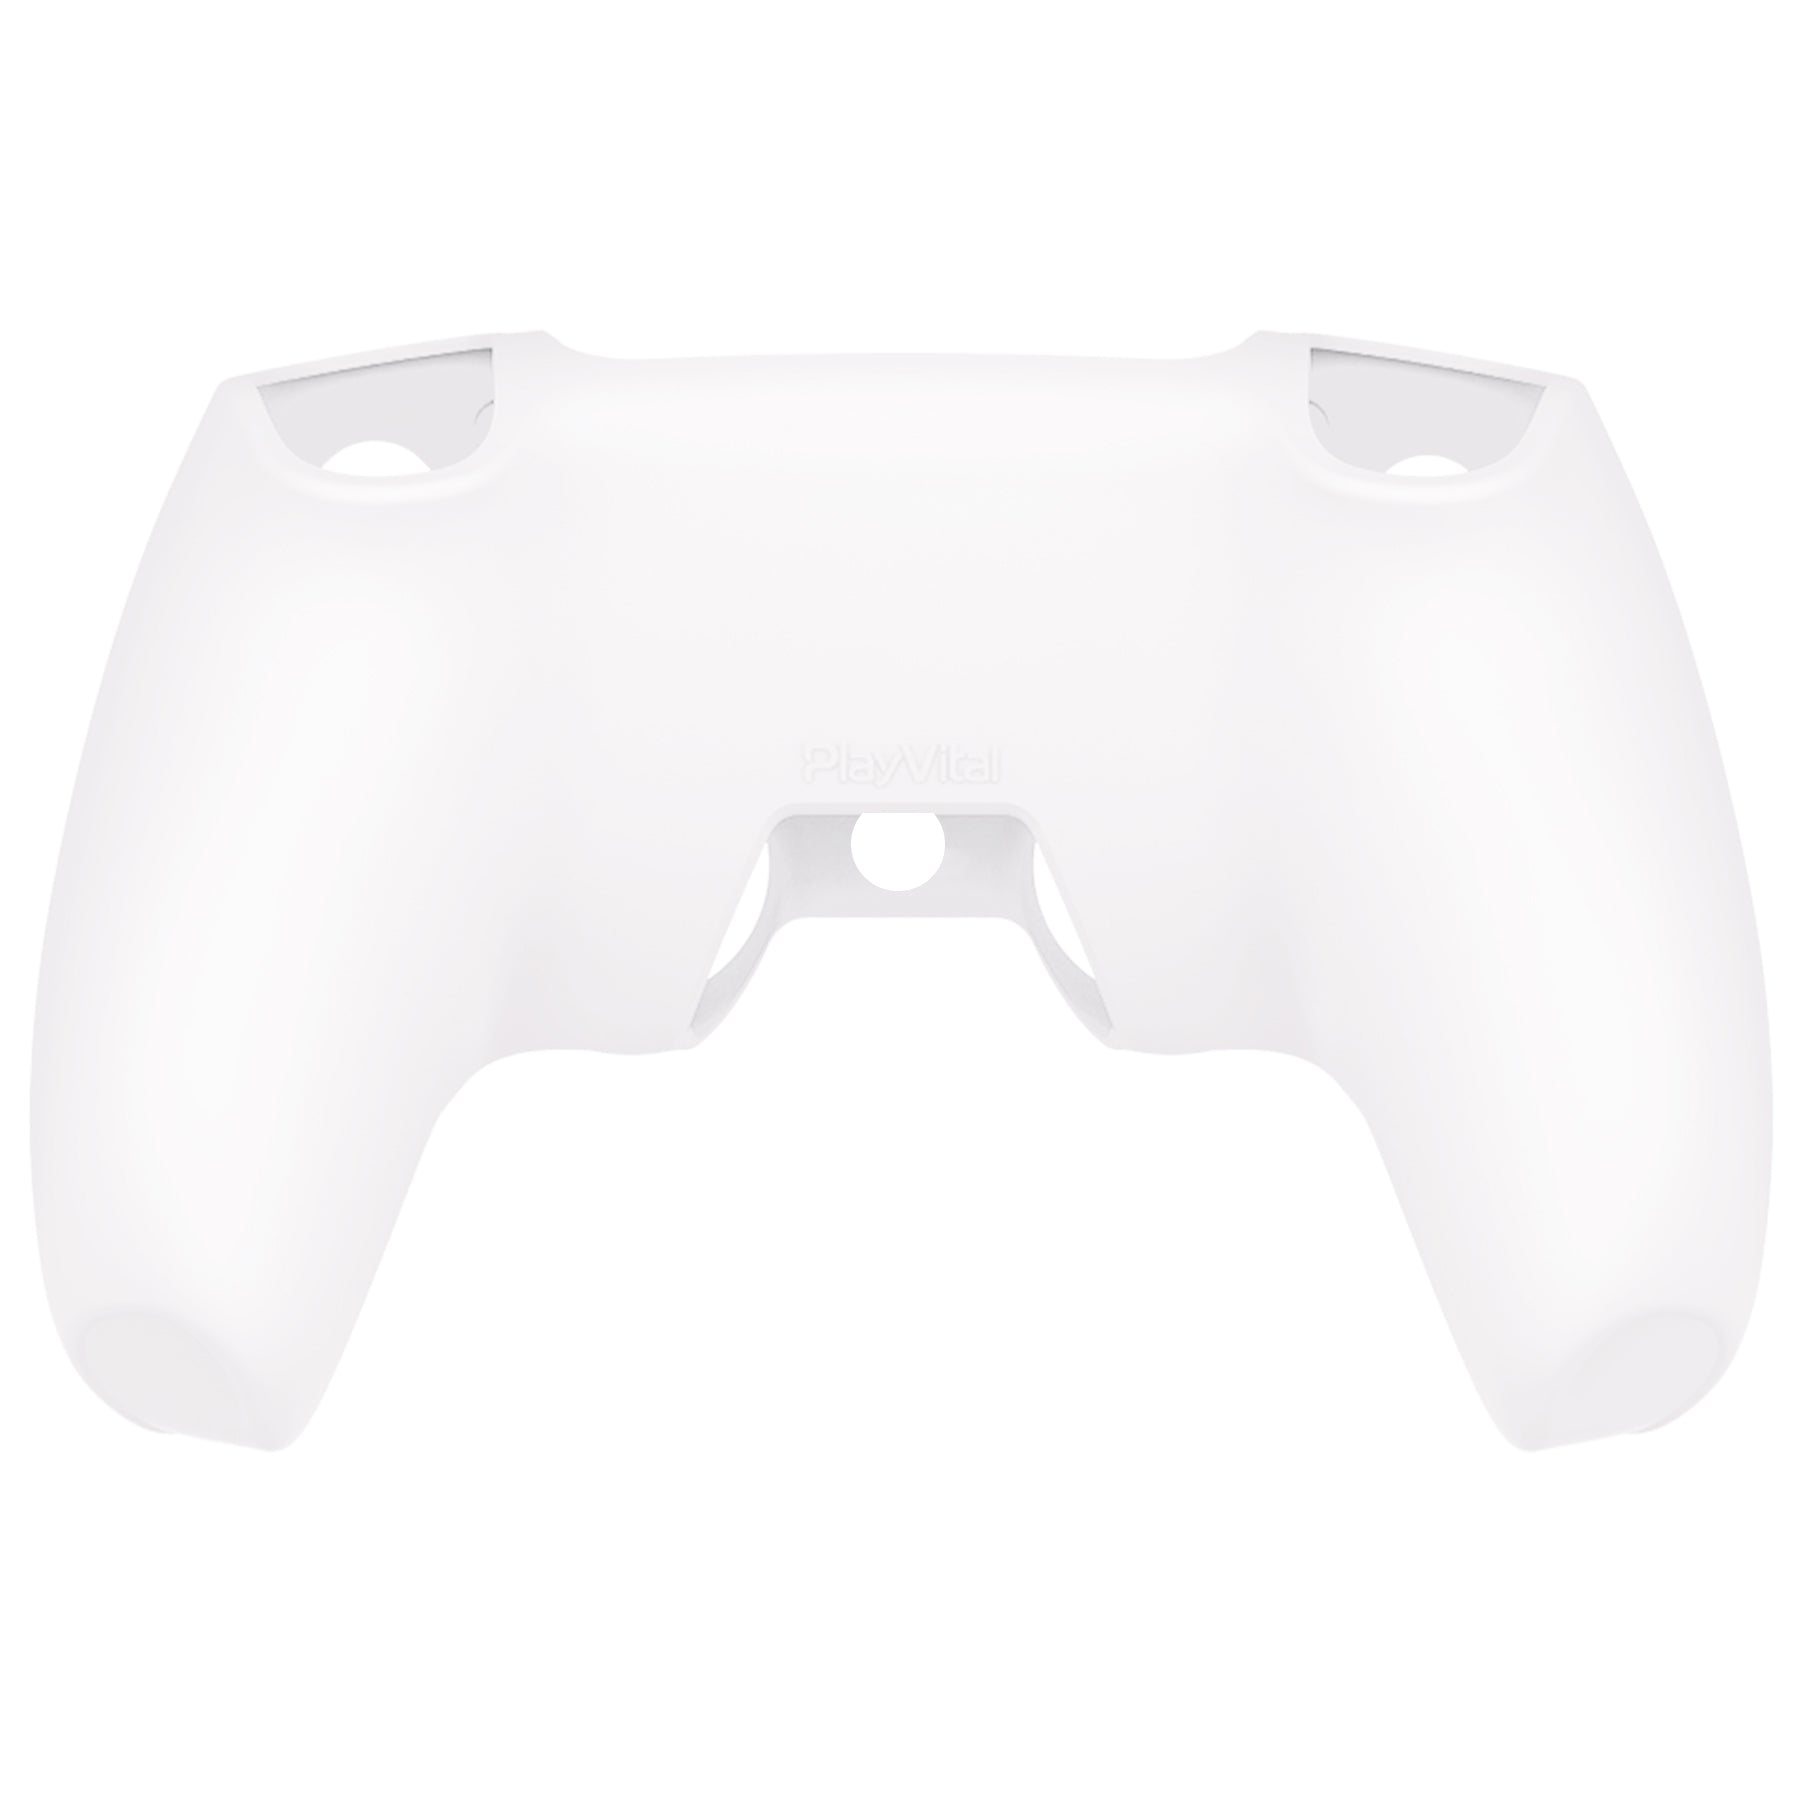 PlayVital Pure Series Dockable Model Anti-Slip Silicone Cover Skin with Thumb Grip Caps for PS5 Wireless Controller - Compatible with Charging Station - White - EKPFP002 PlayVital